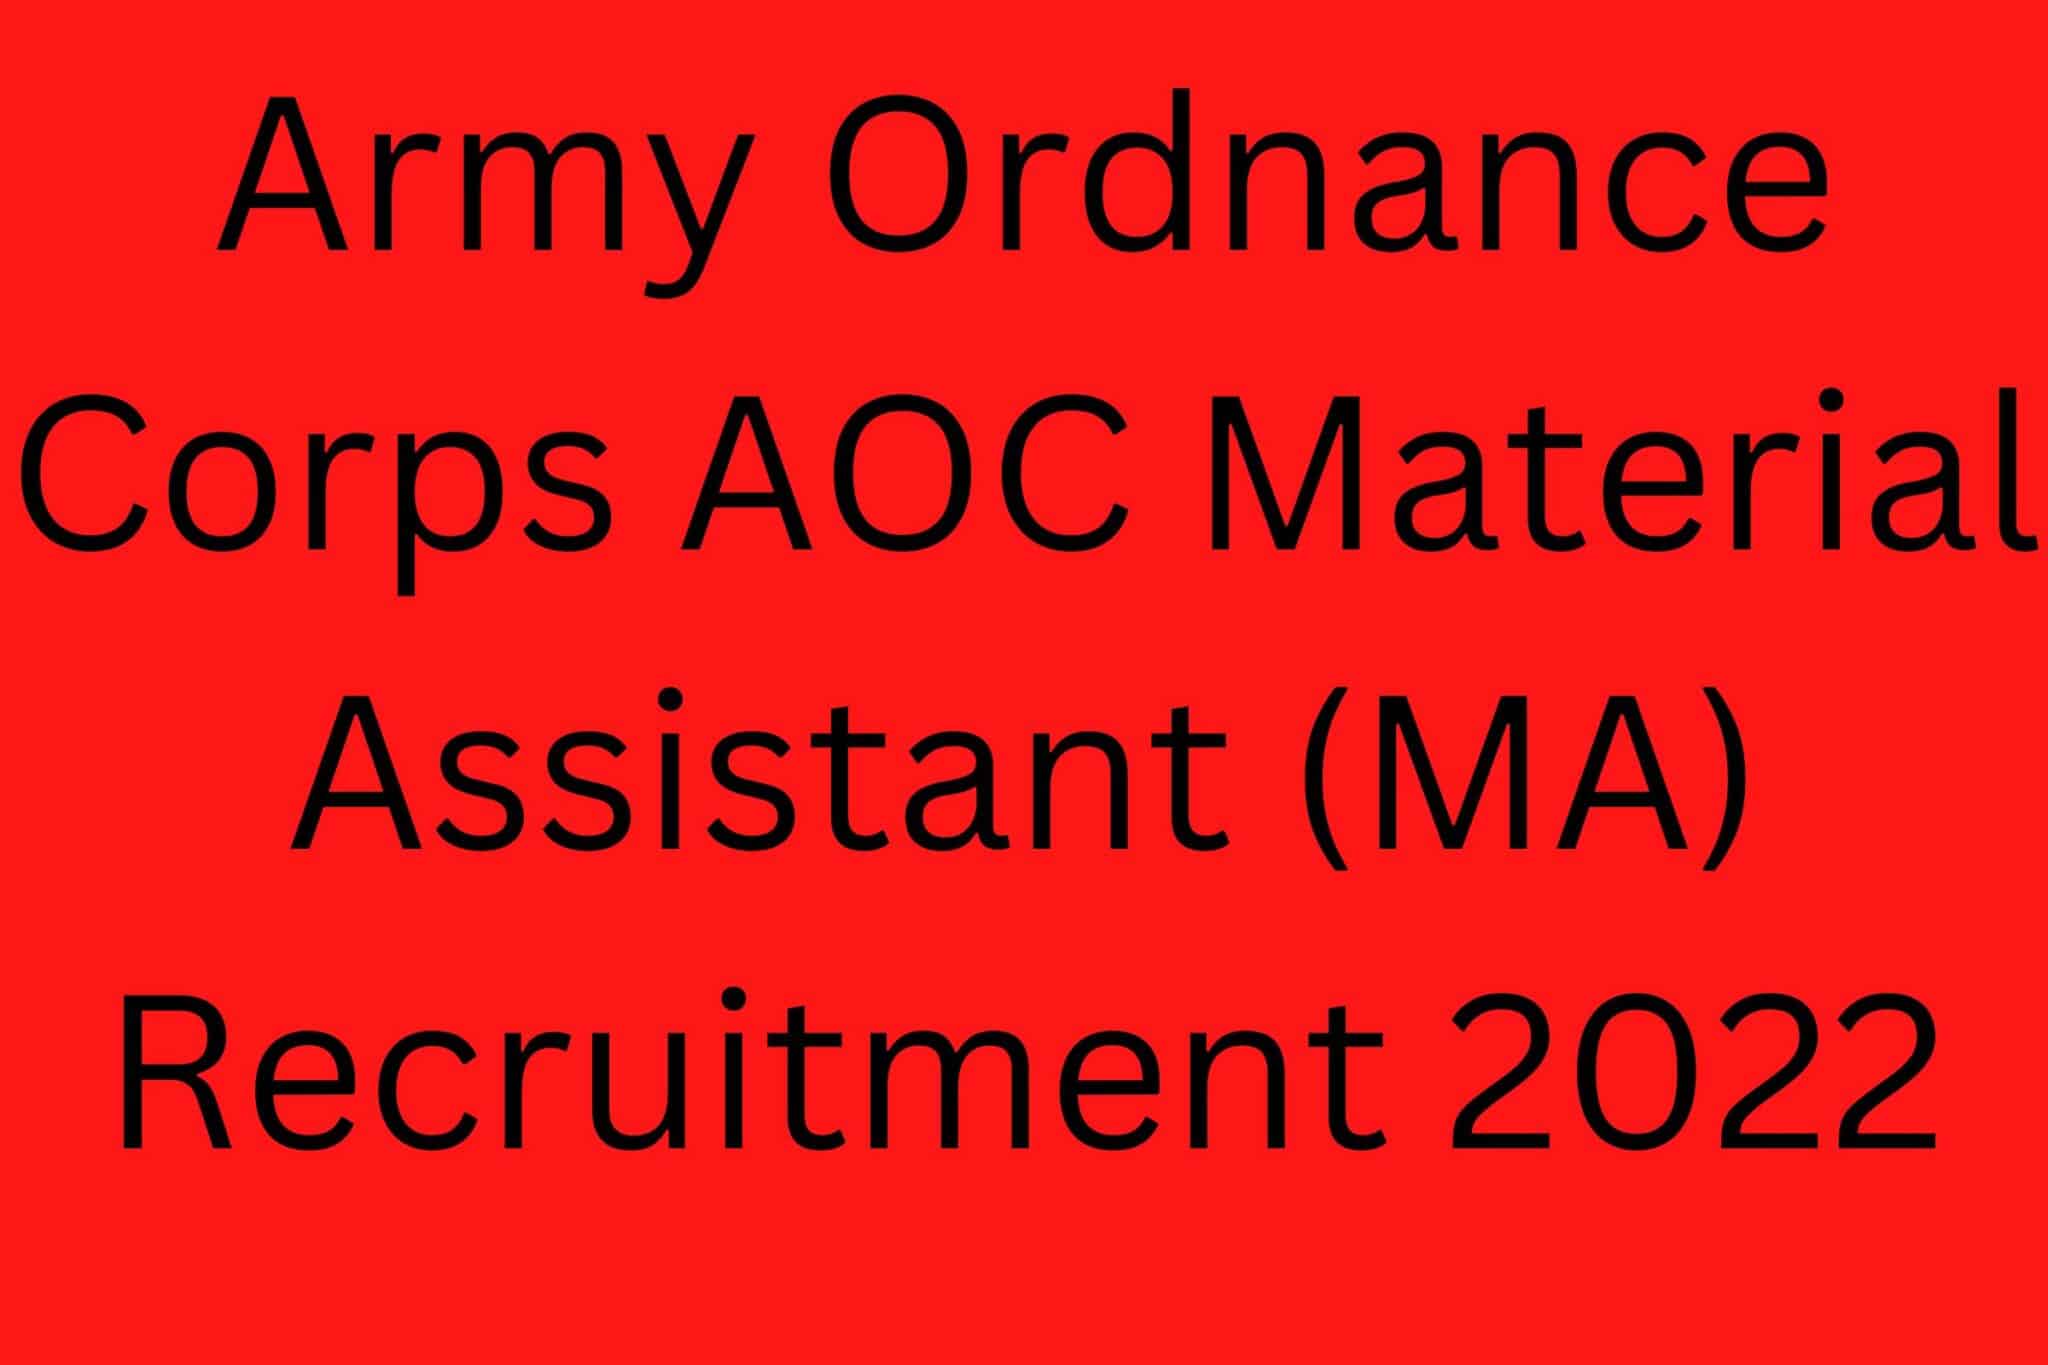 Army Ordnance Corps Aoc Material Assistant (Ma) Recruitment 2022